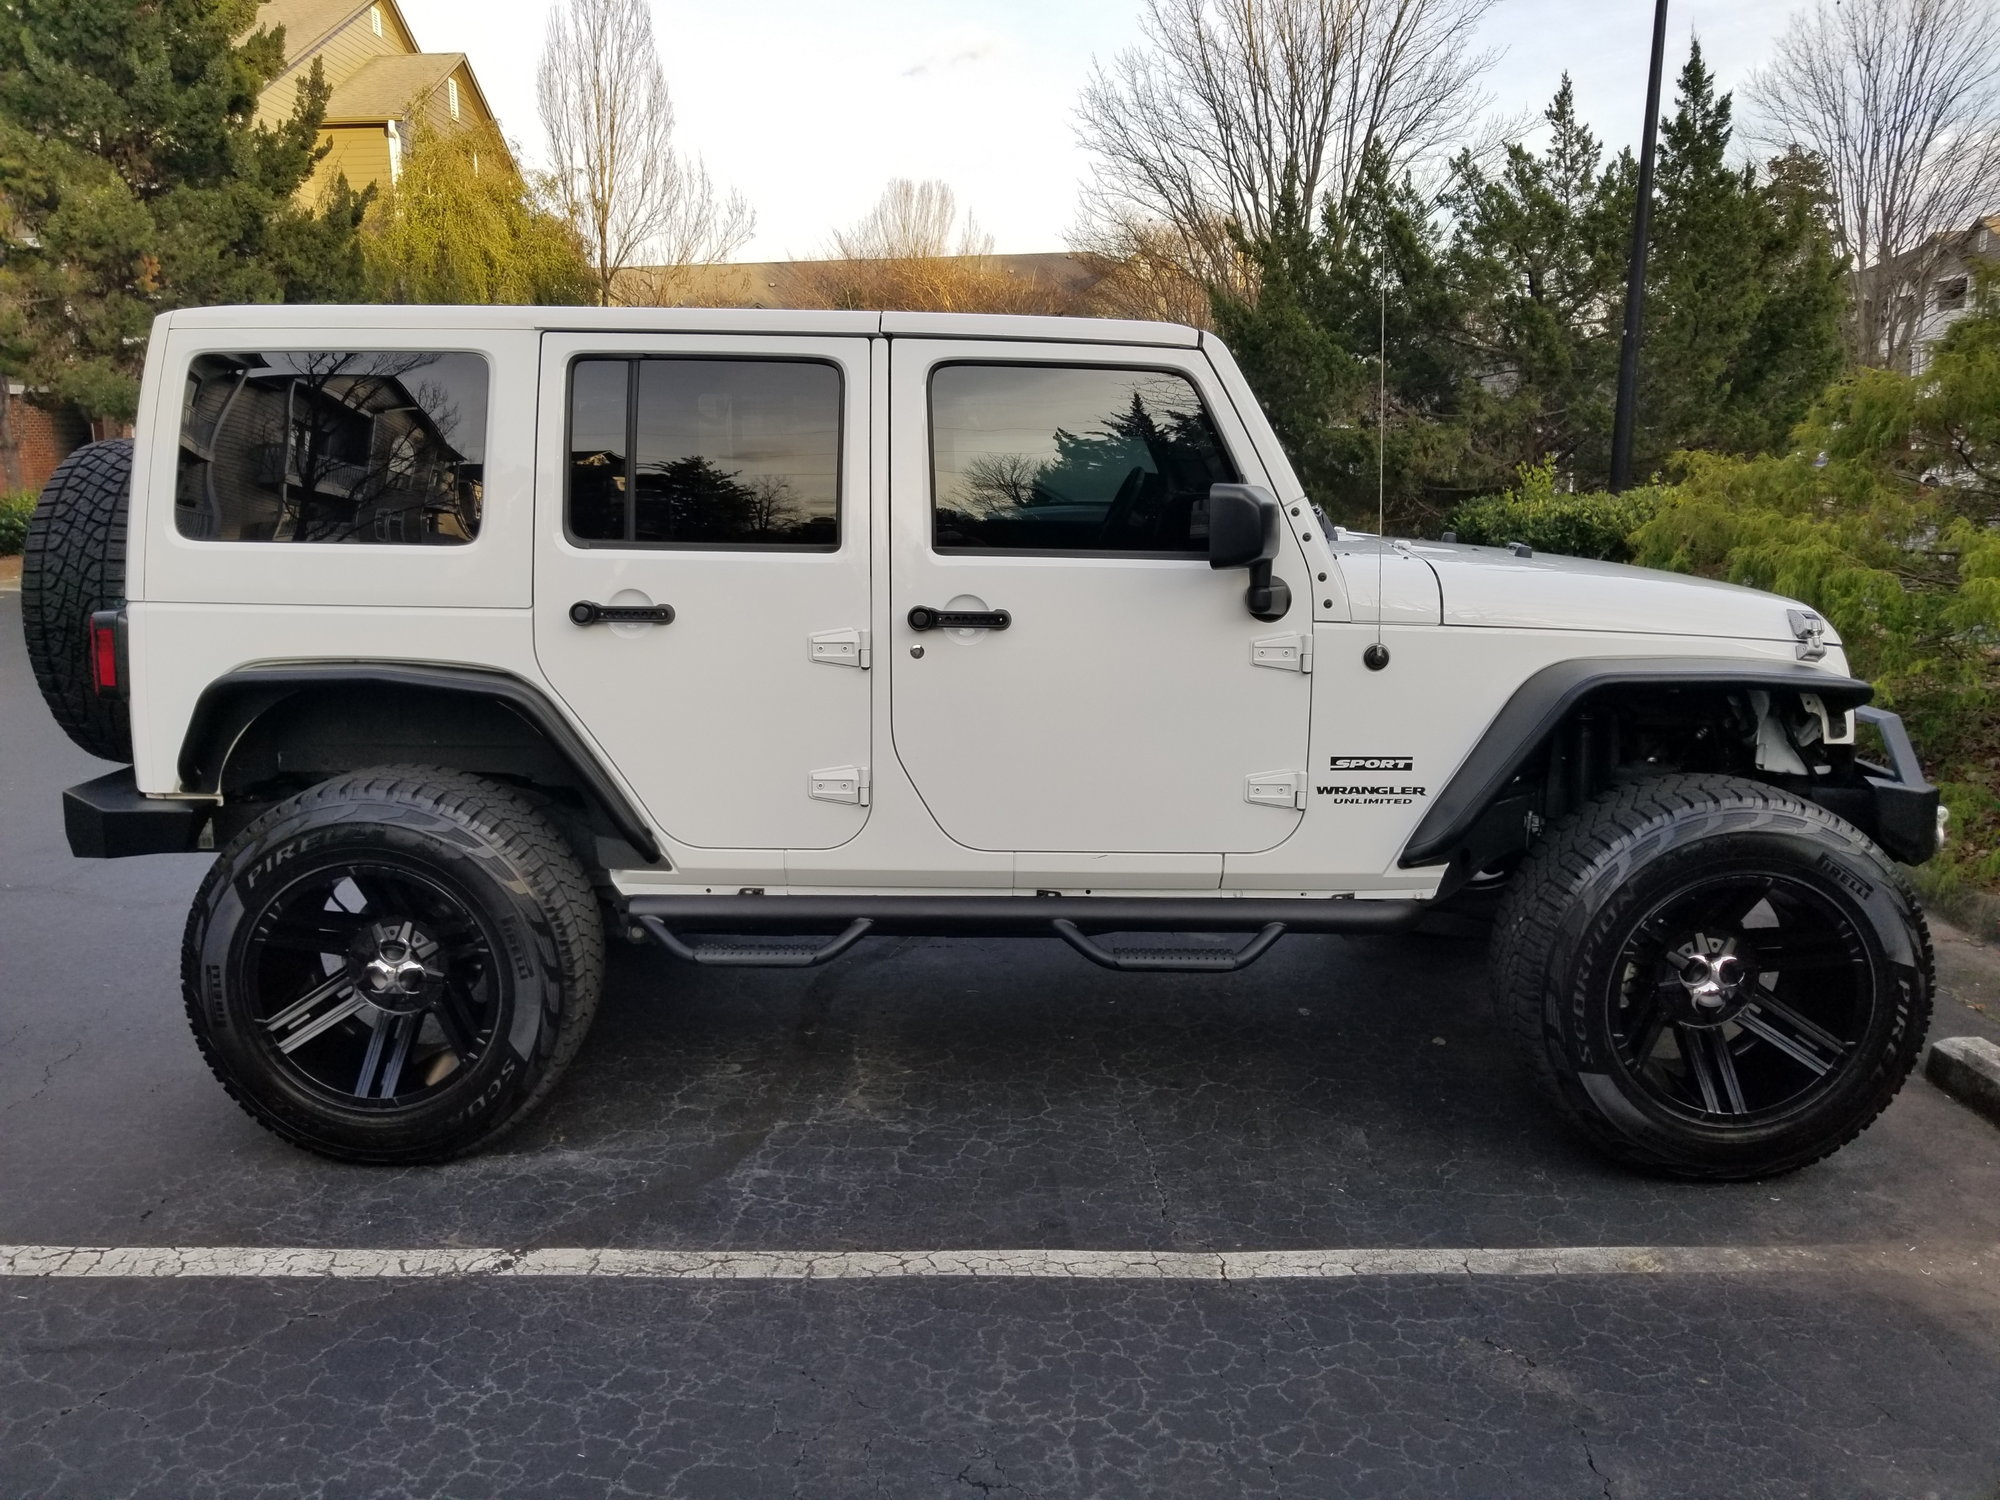 2017 Jeep Wrangler - Supercharged 2017 Jeep Wrangler Unlimited Sport - Used - VIN 1C4BJWDG0HL570865 - 28,500 Miles - 6 cyl - 4WD - Manual - SUV - White - Dunwoody, GA 30338, United States